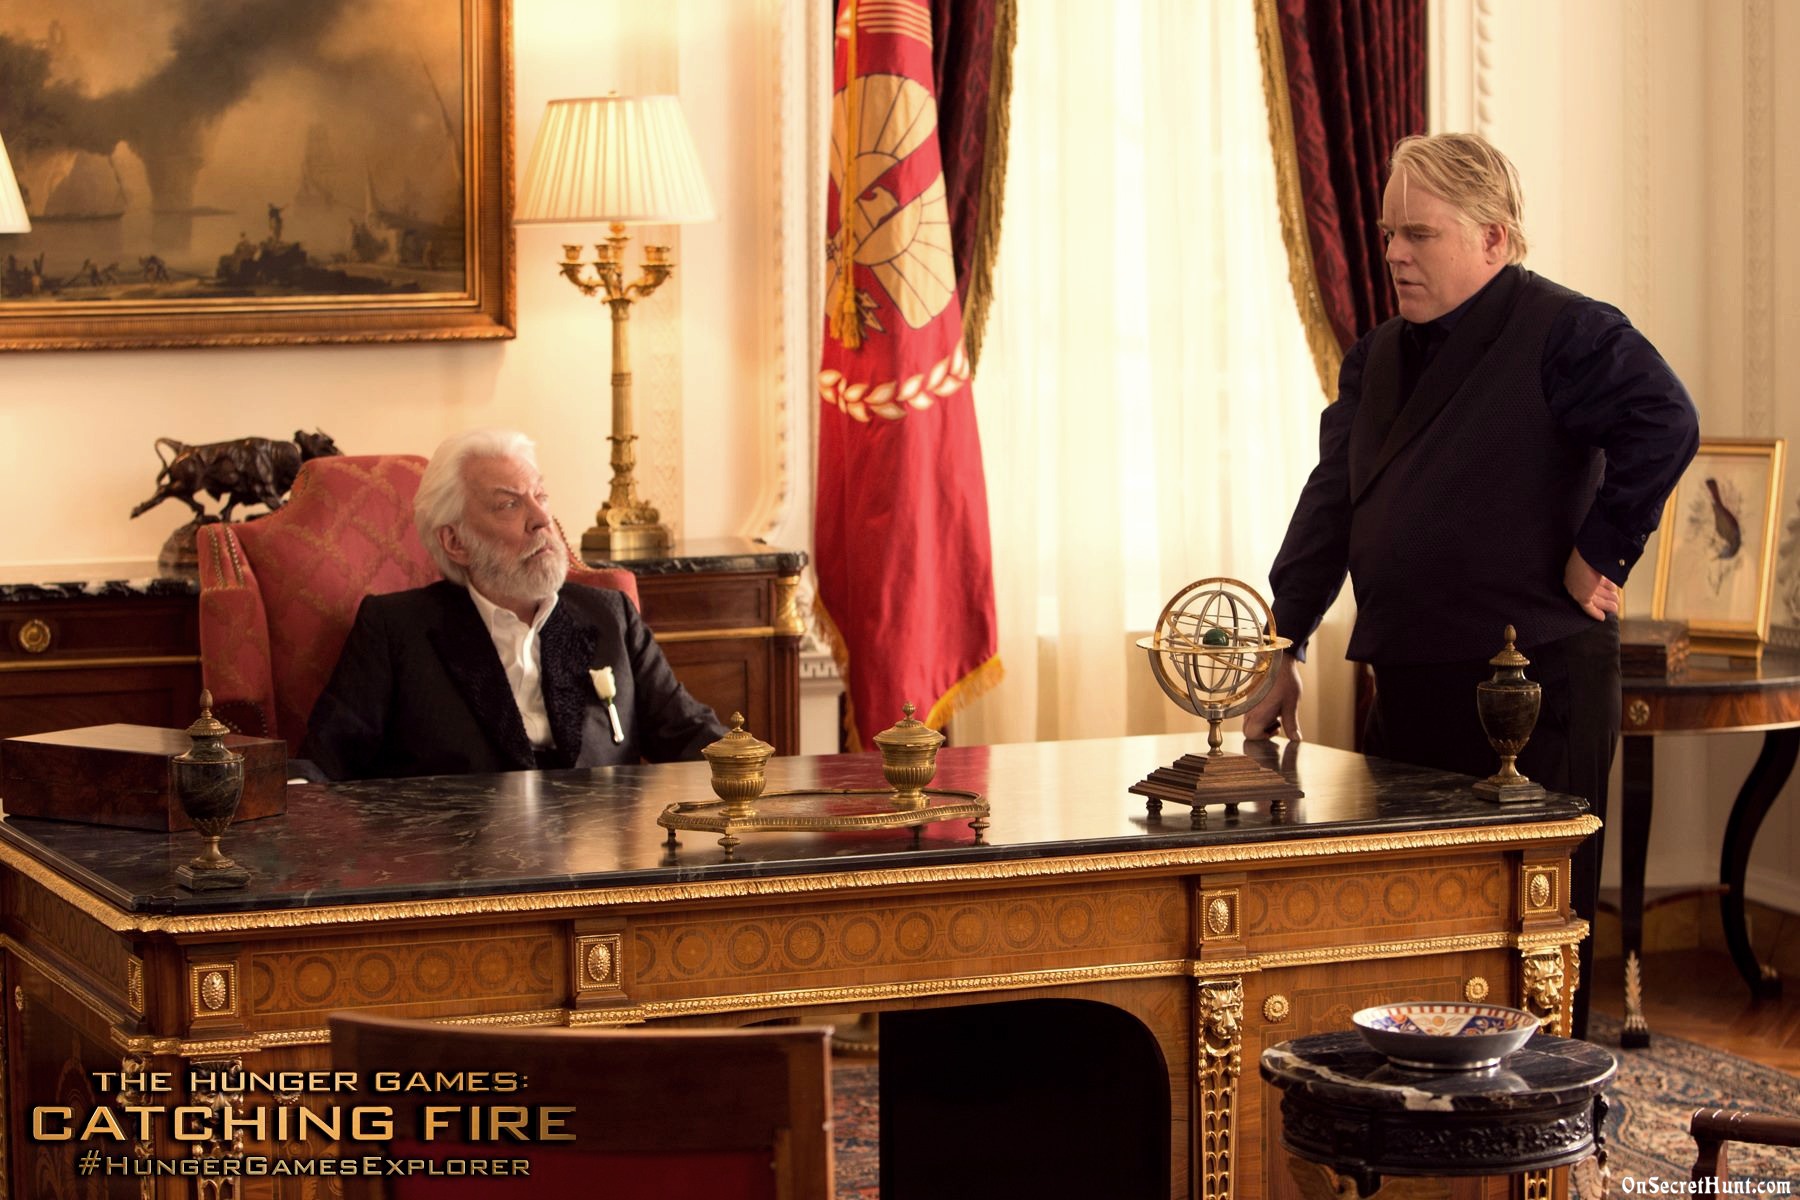 Hunger-Games-Catching-Fire-Philip-Seymour-Hoffman-Donald-Sutherland